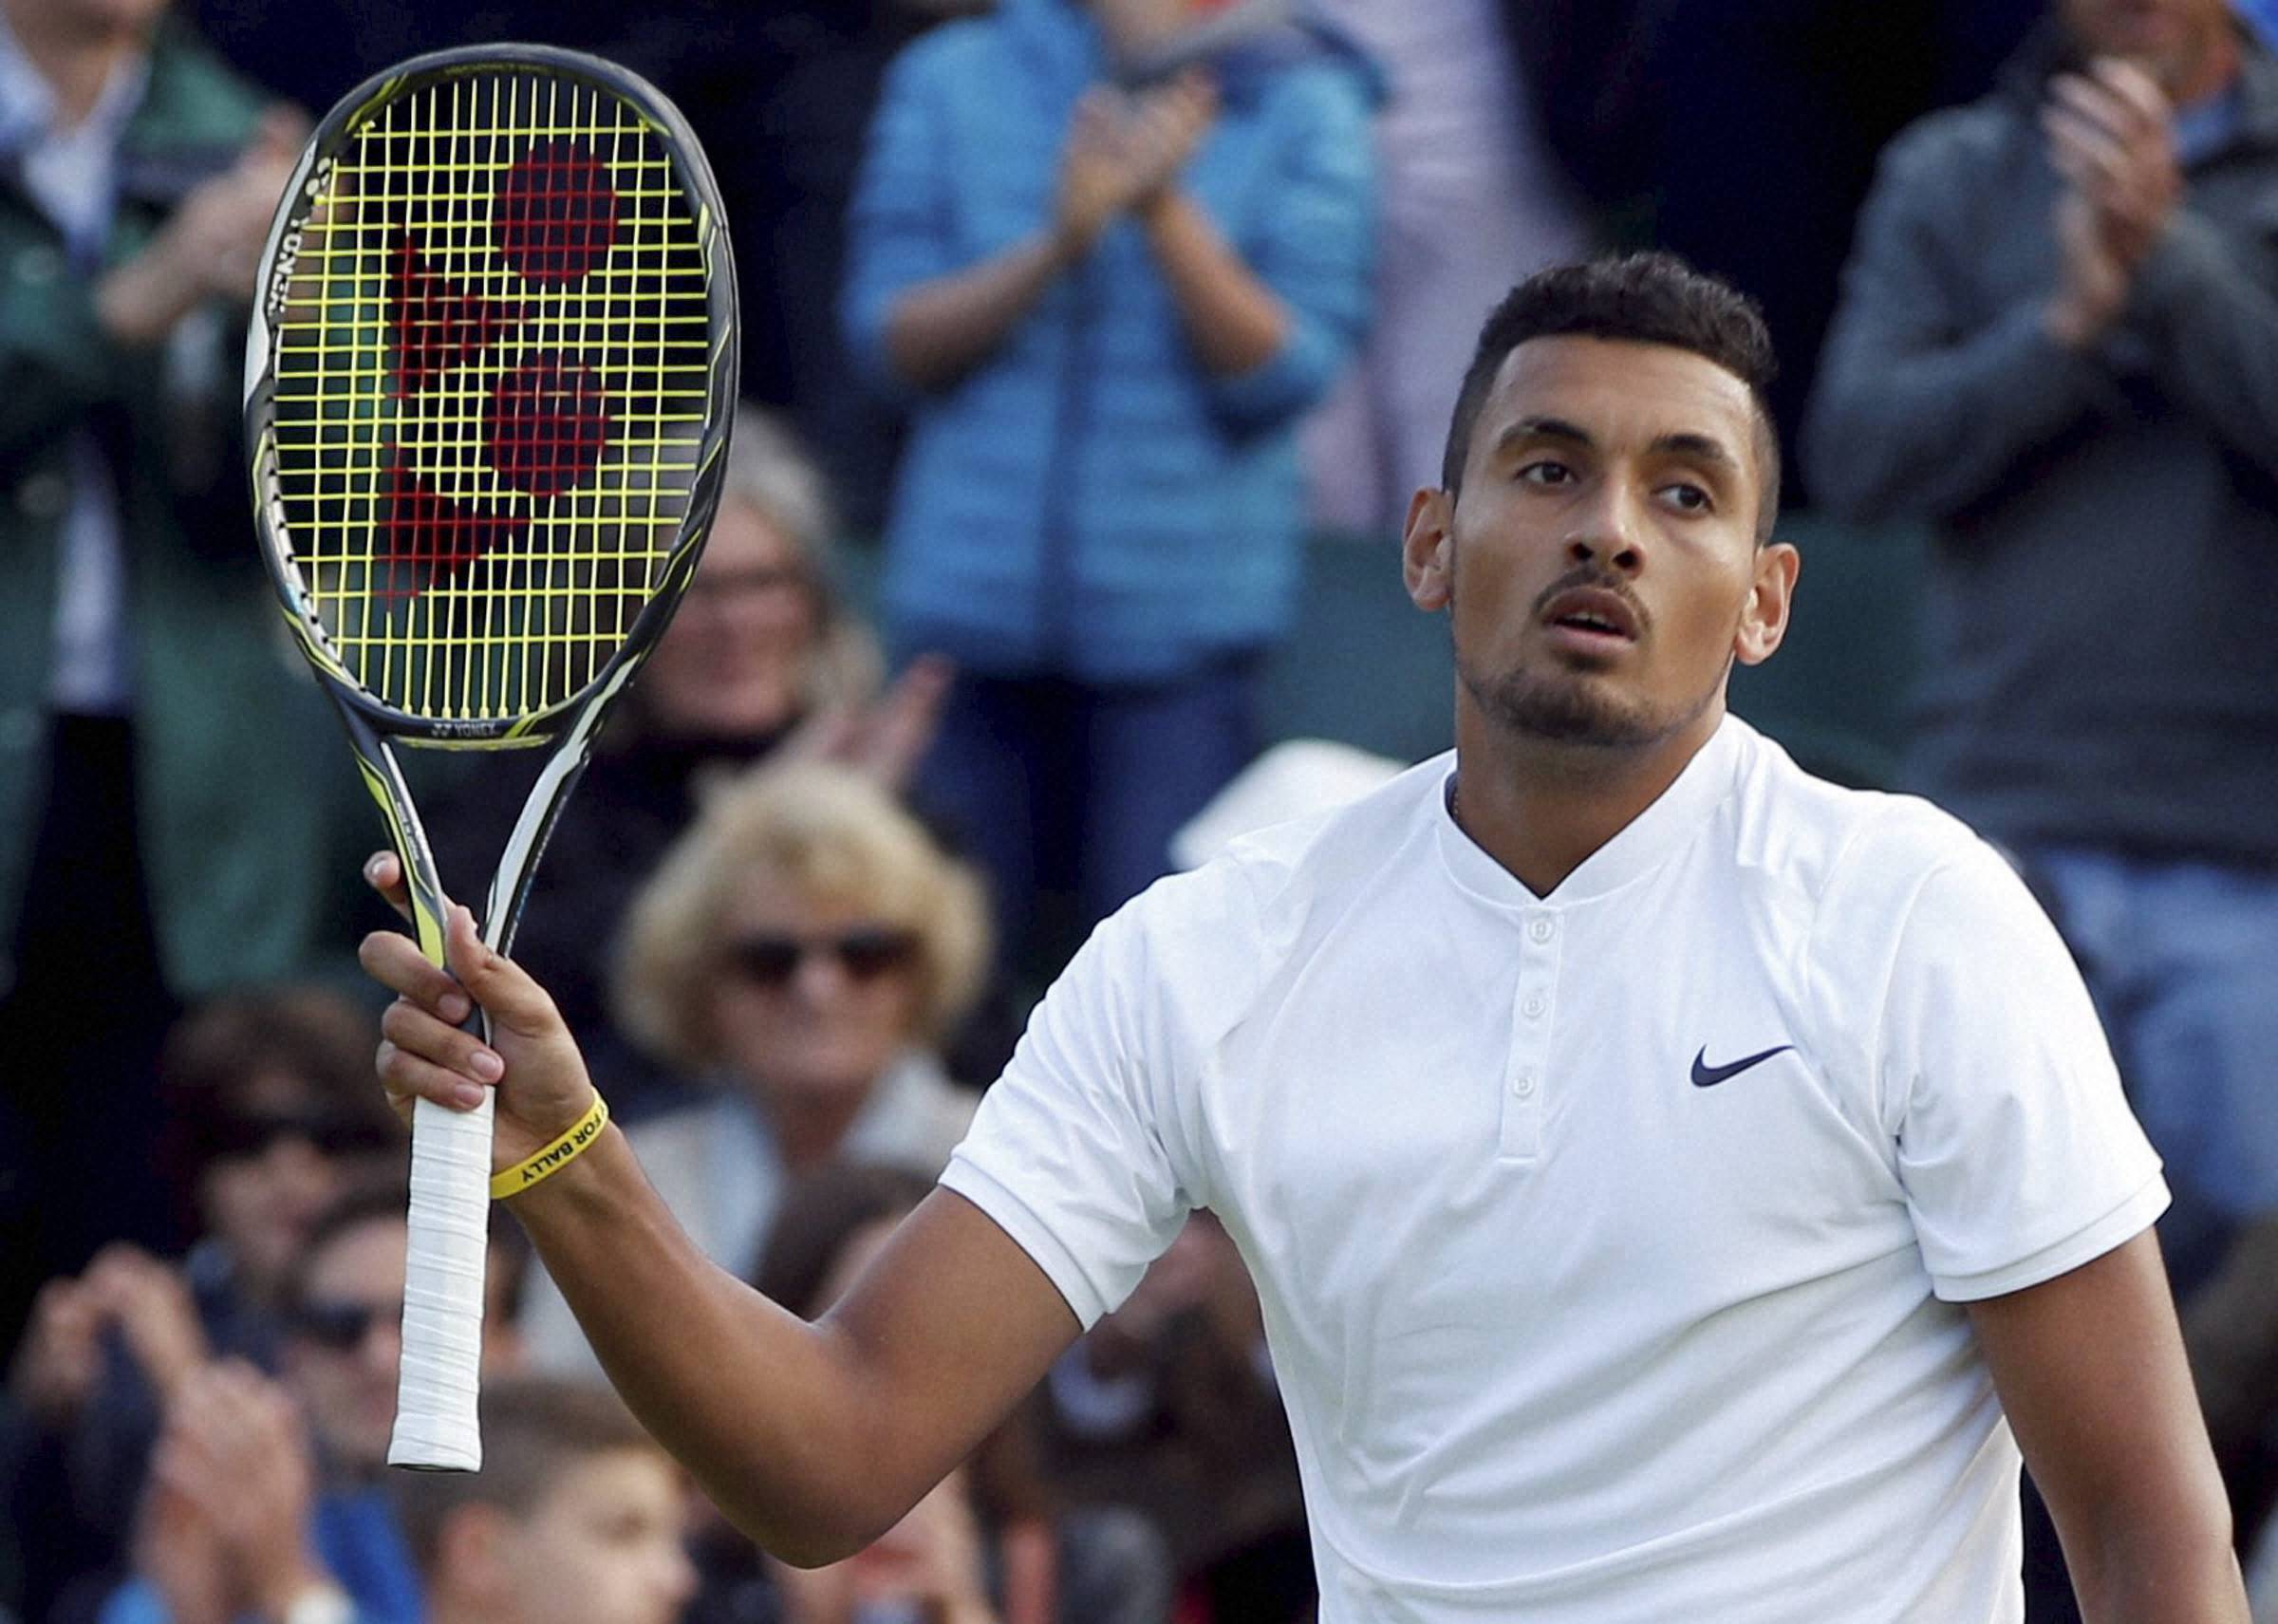 Tennis: Kyrgios involved in heated row with journalists